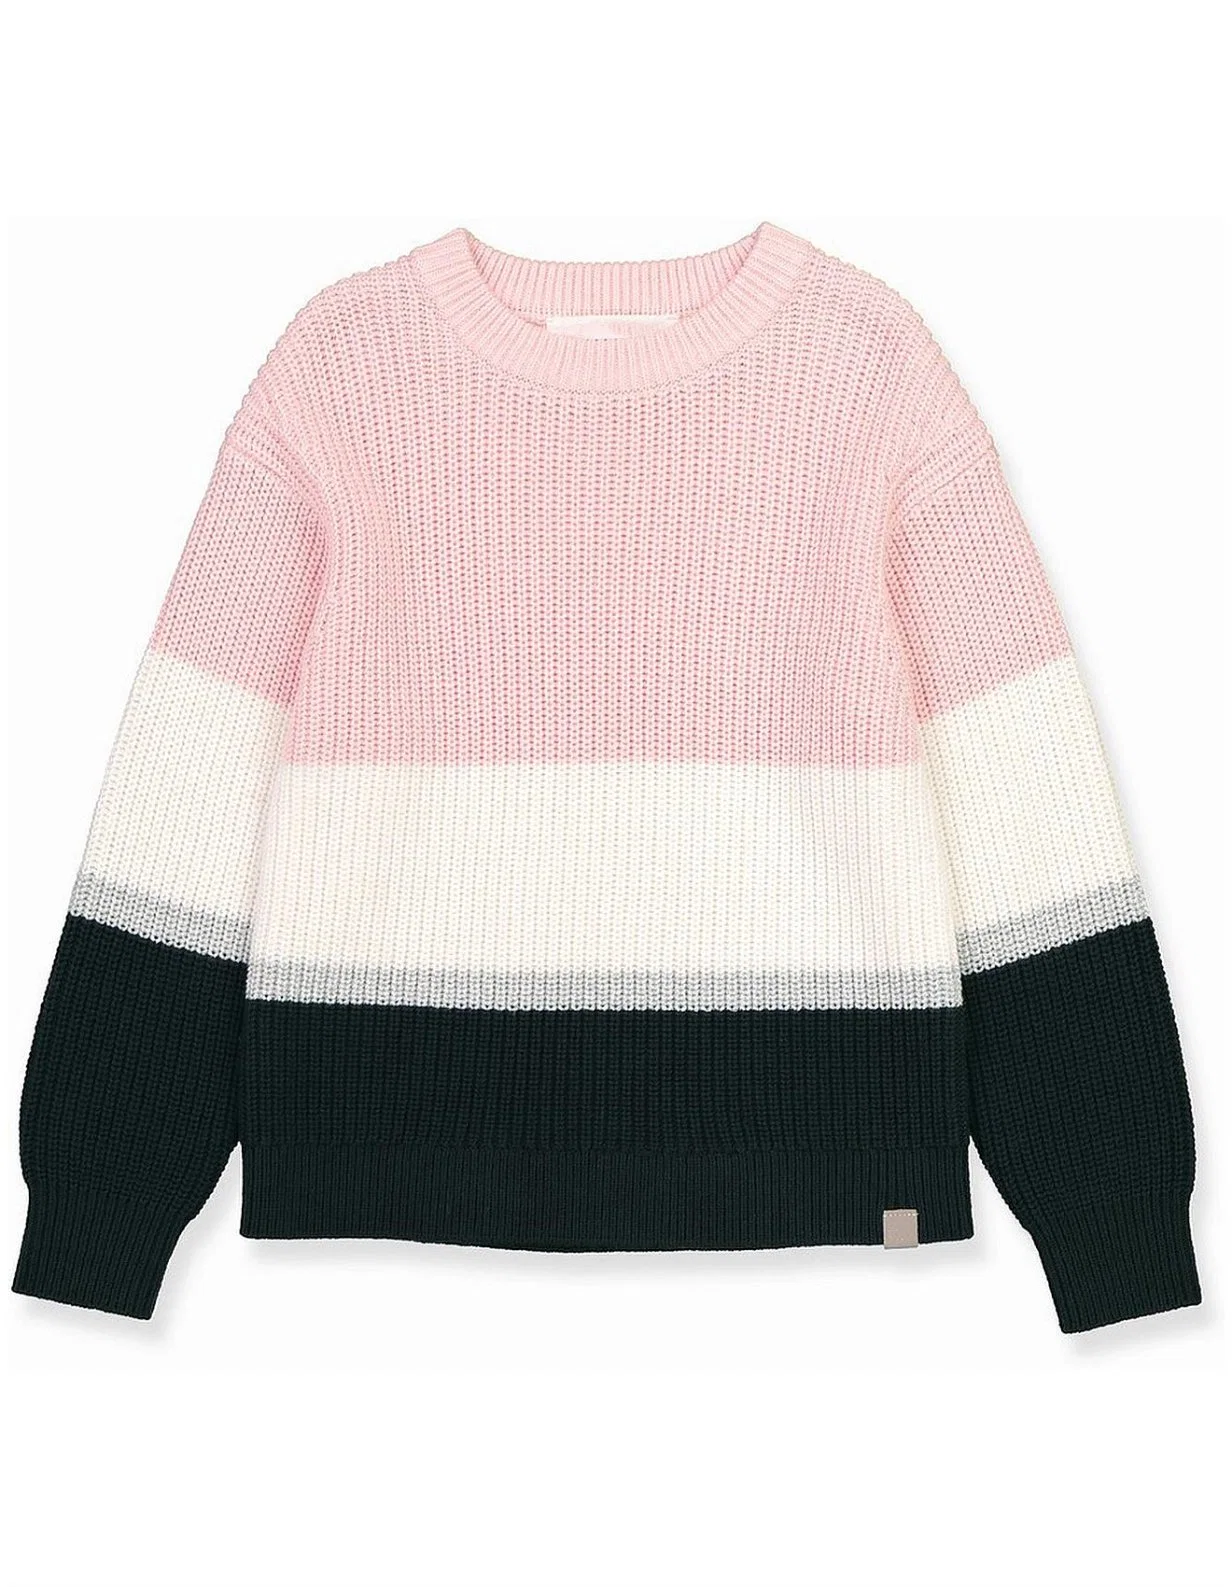 Fashion Baby Girl's Clothing Multi Stripe Knitwear Sweater Clothes